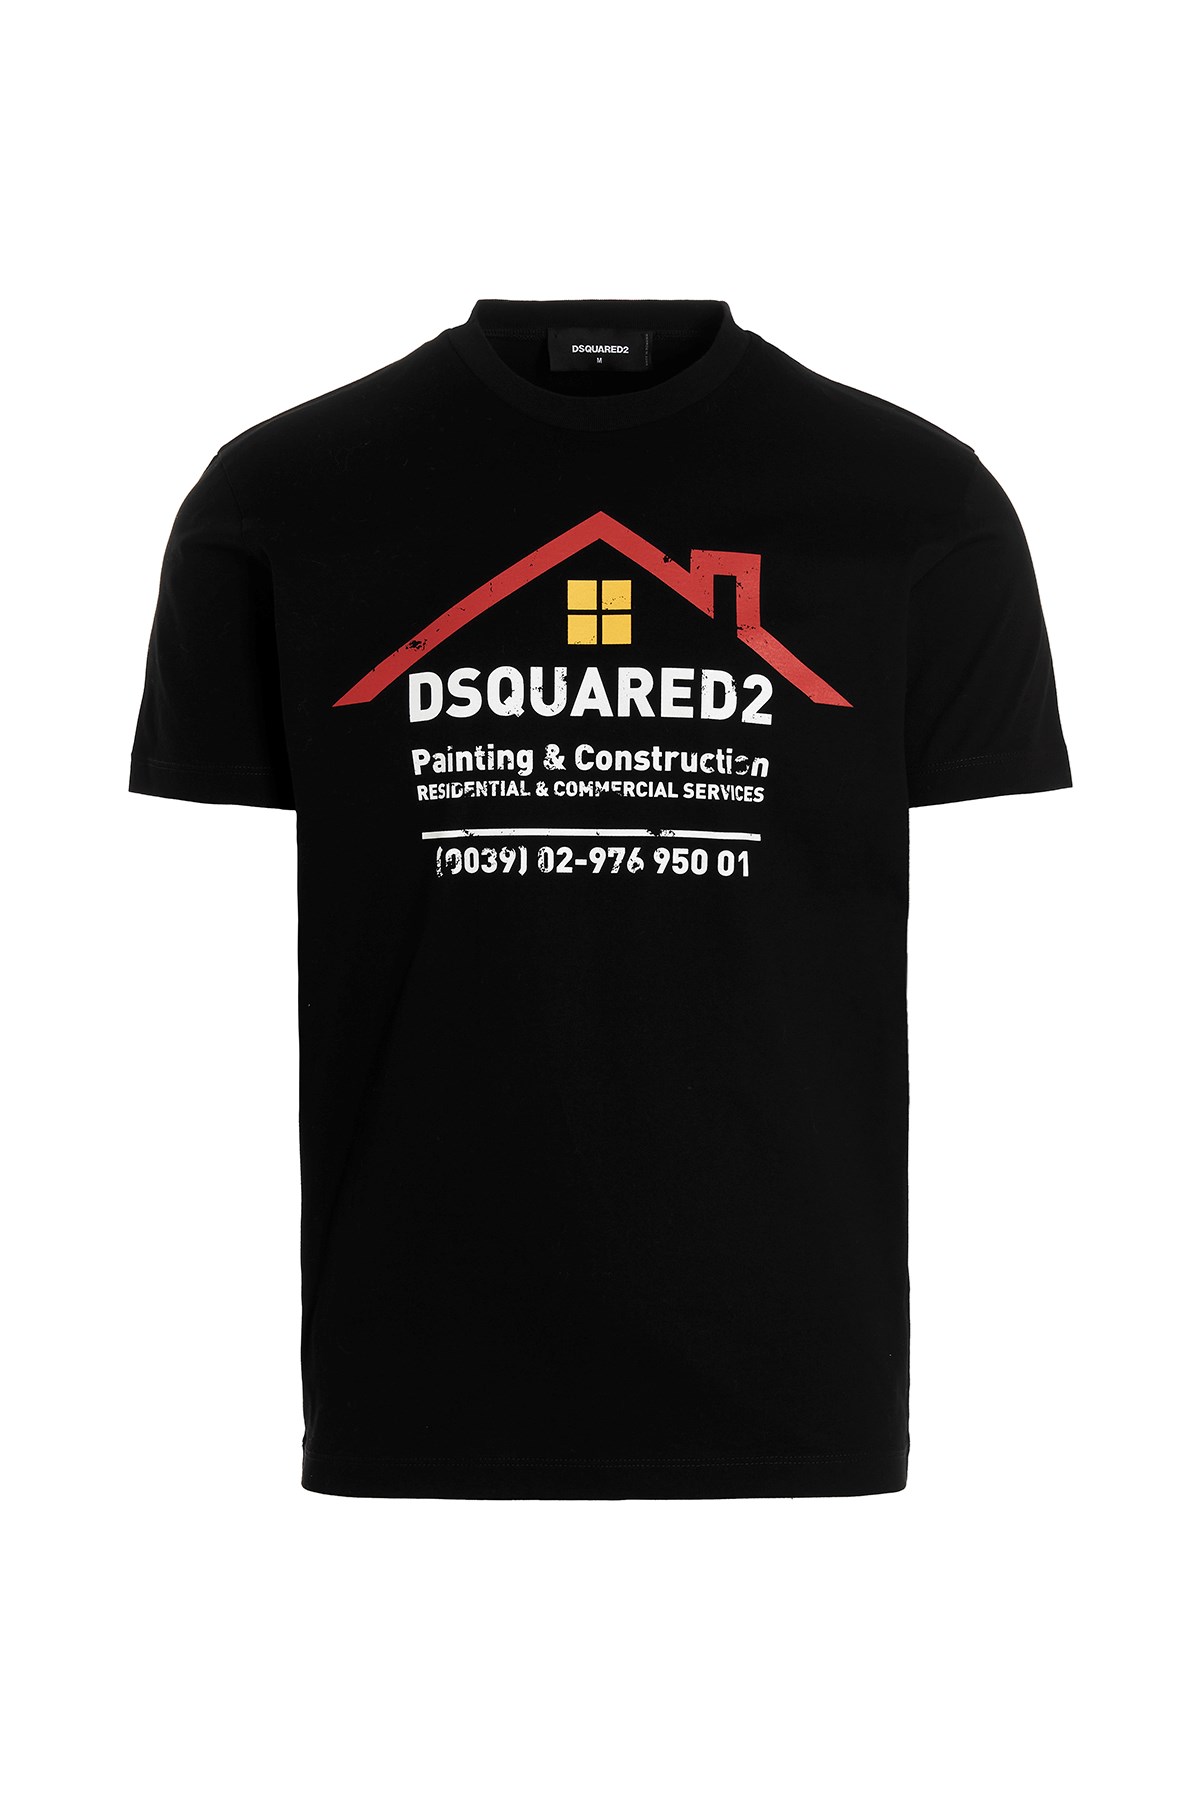 DSQUARED2 T-Shirt 'Residential Cool'